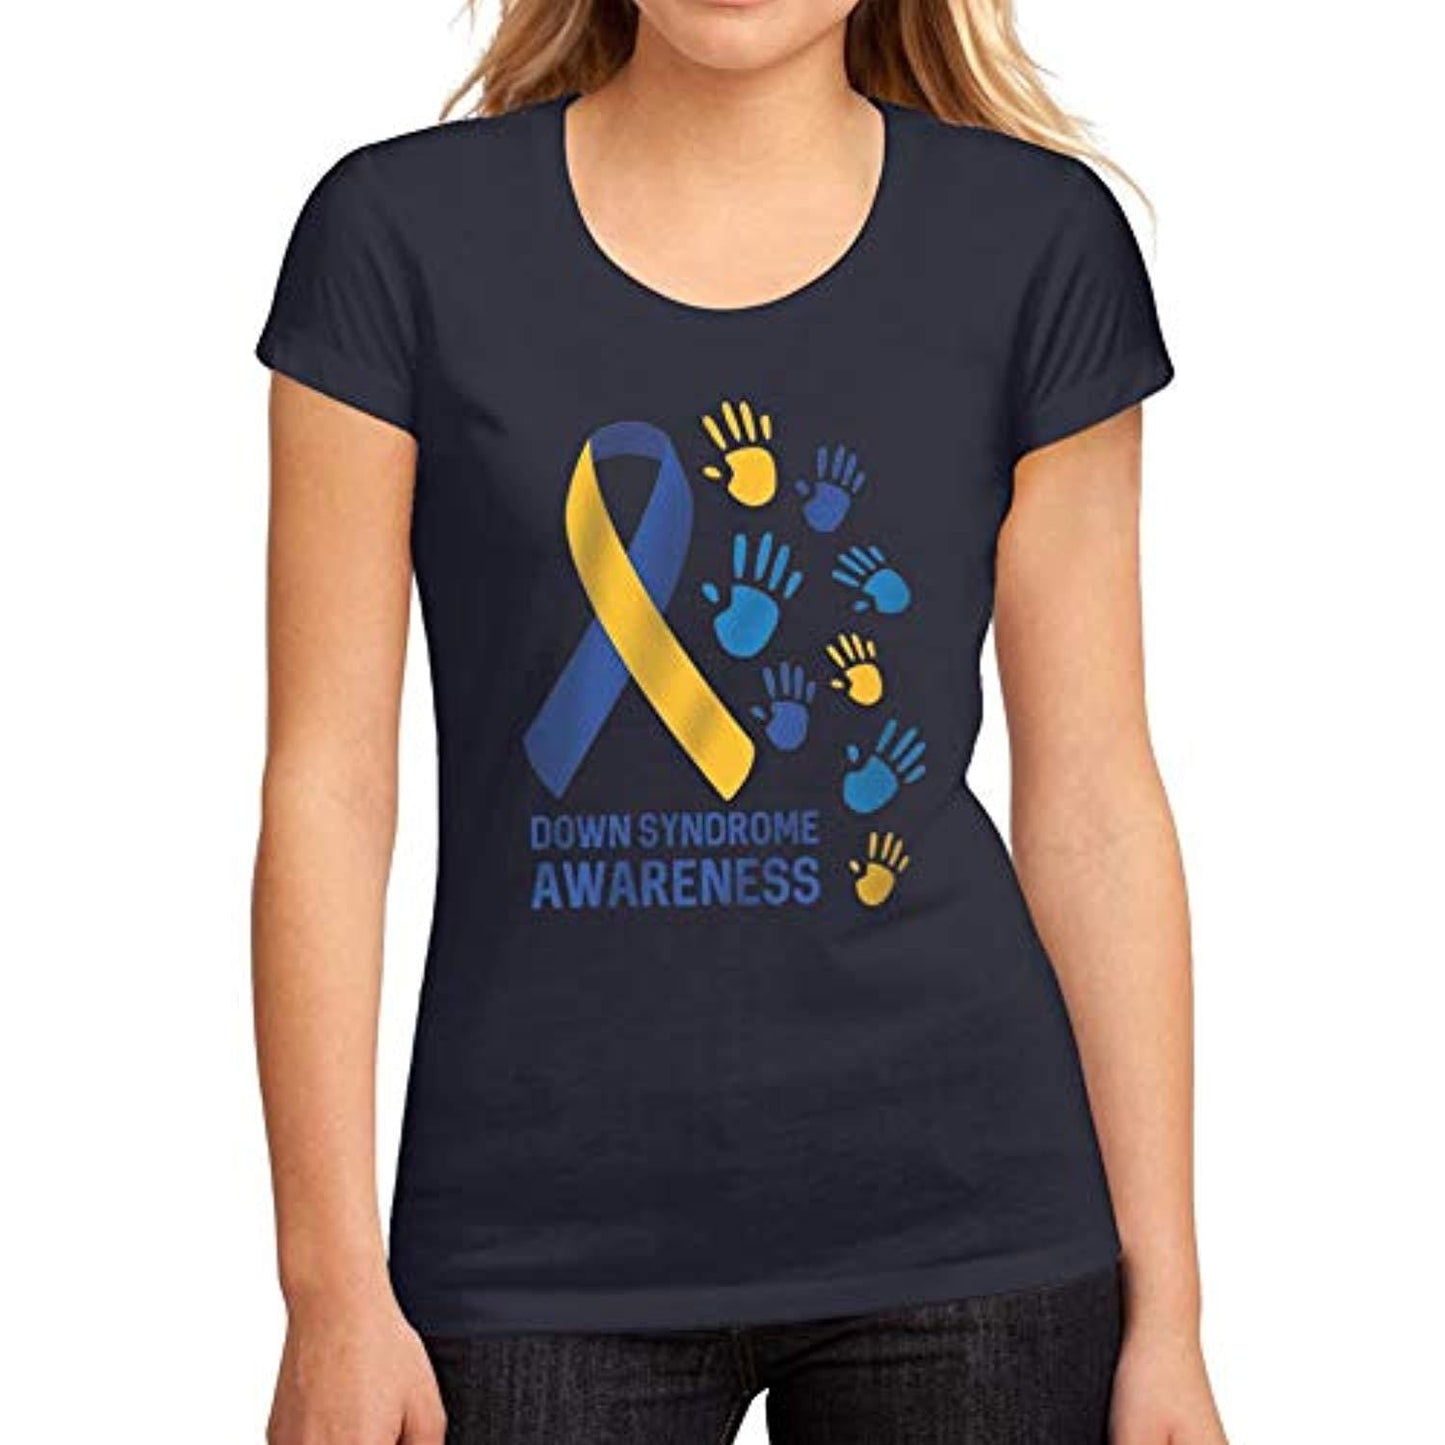 Ultrabasic Women's Graphic T-Shirt Down Syndrome Awareness French Navy